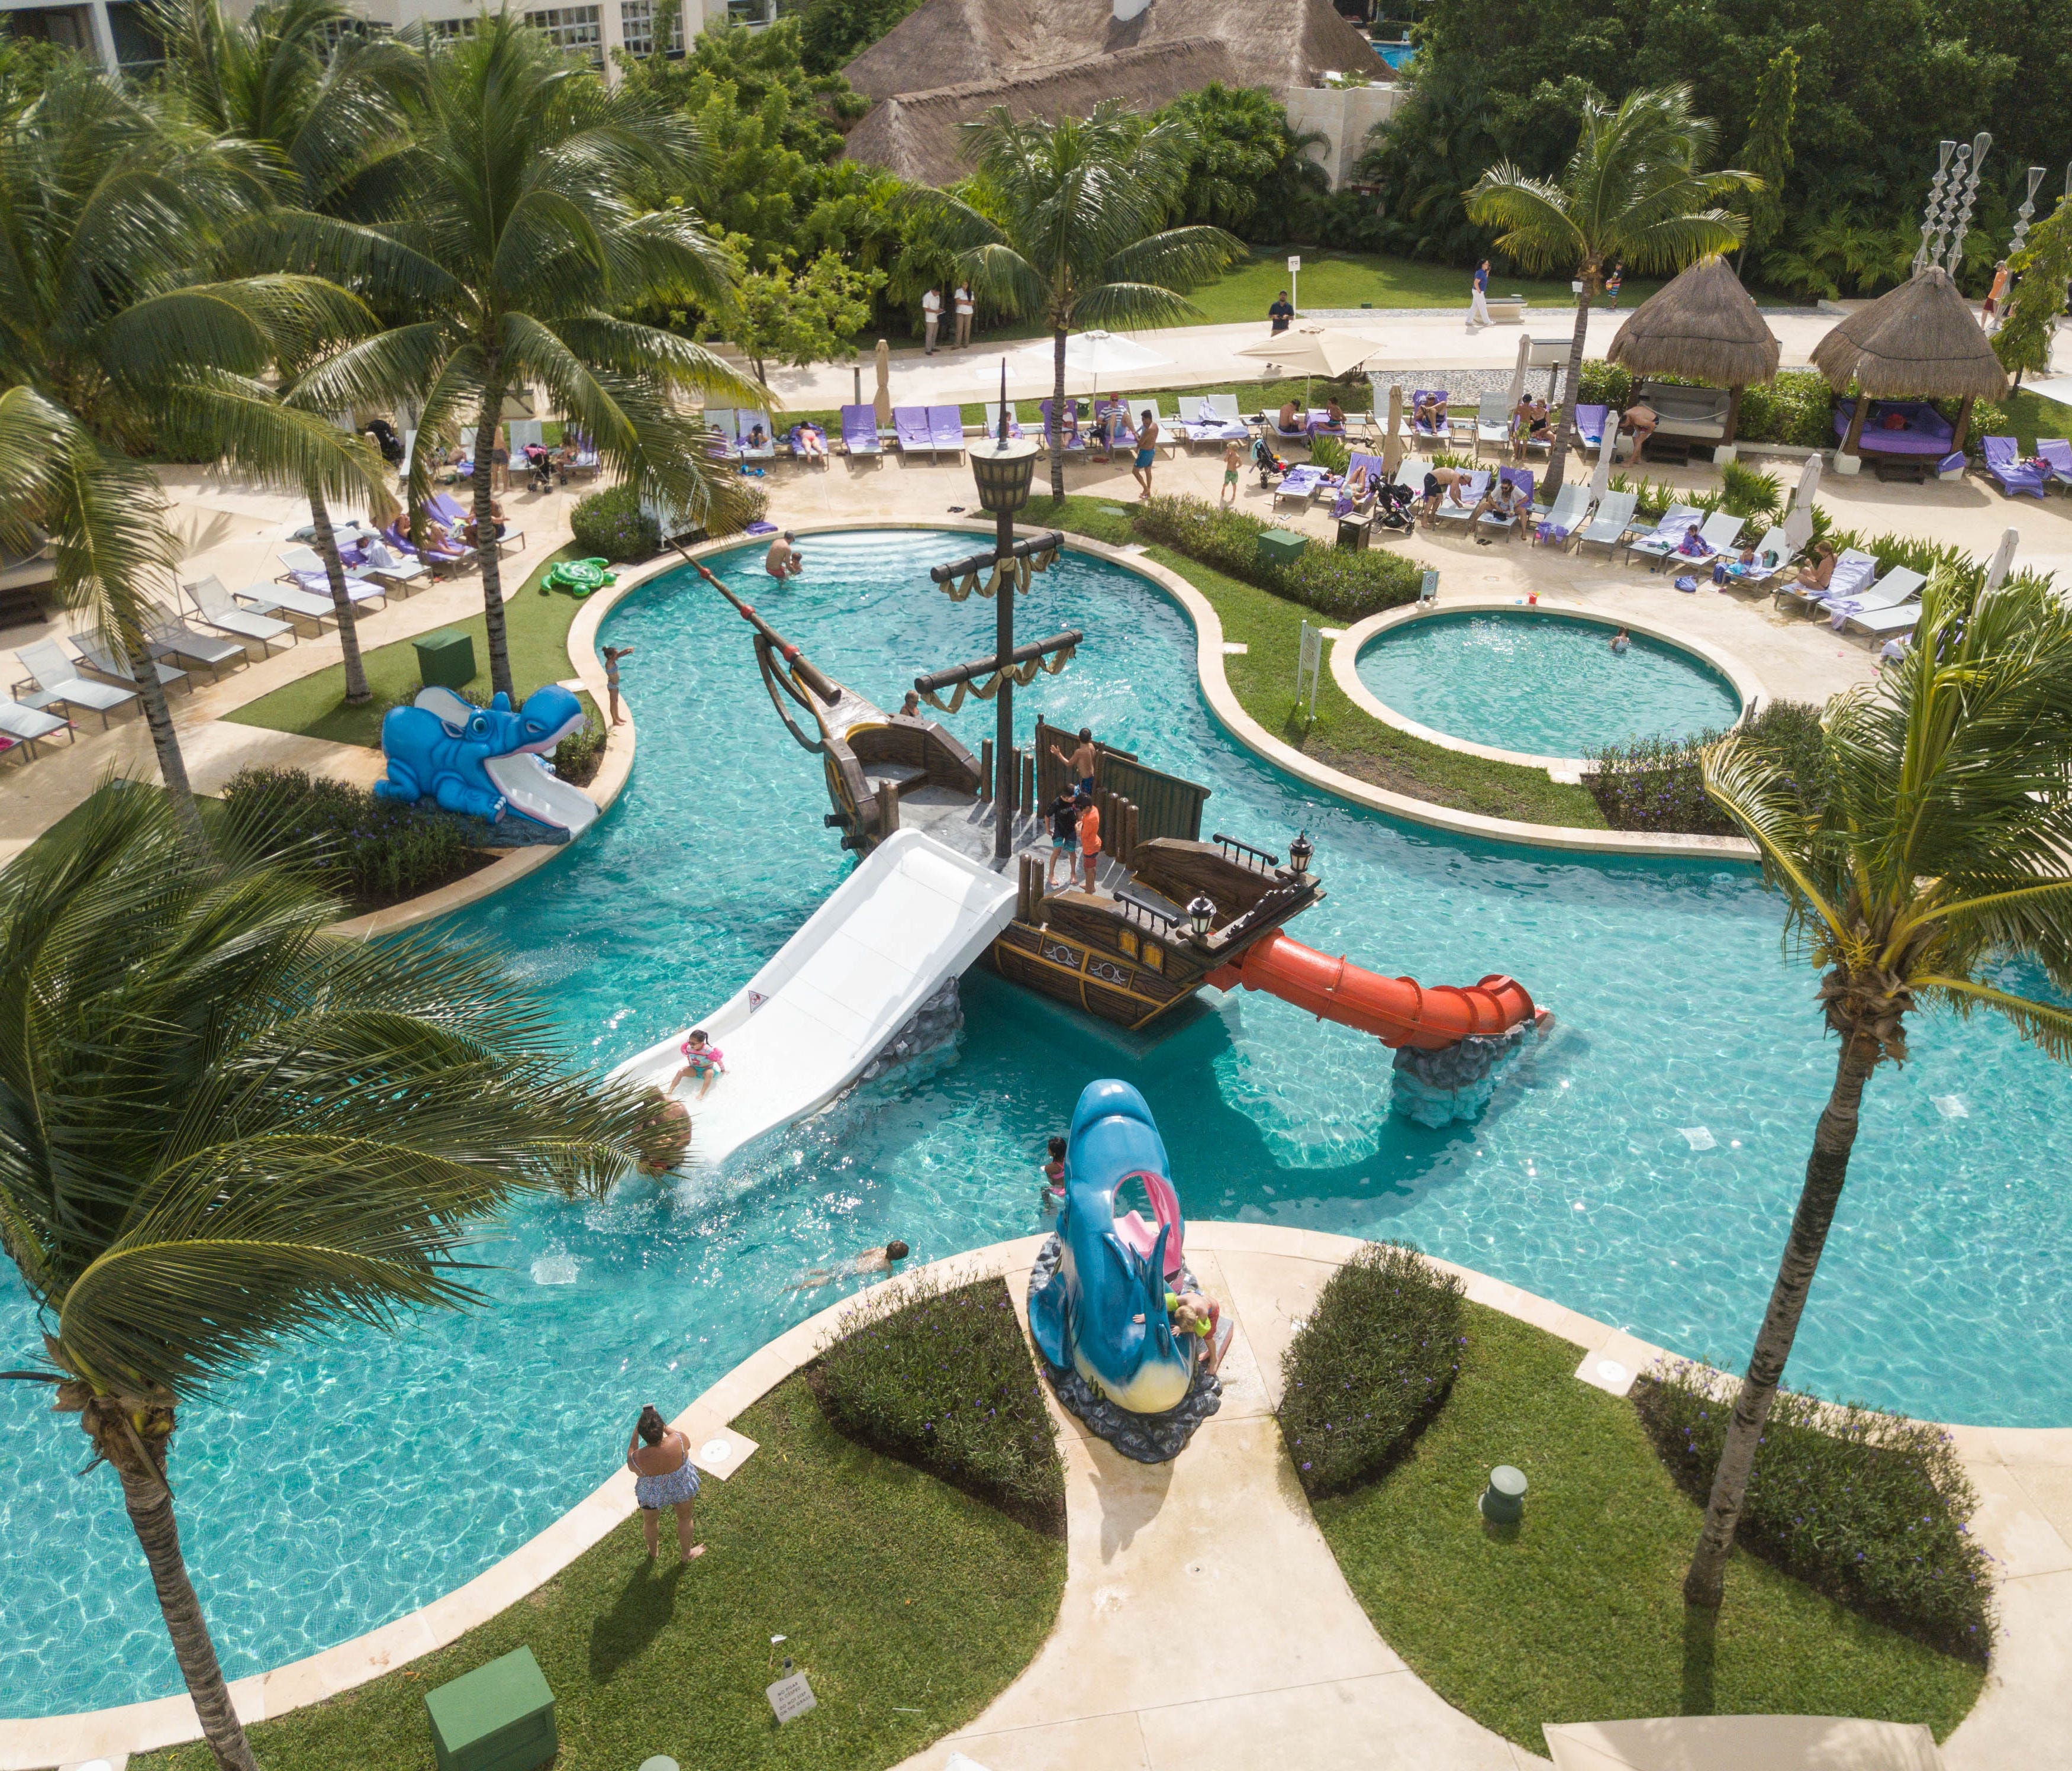 Paradisus Playa del Carmen La Esmeralda: One of the best family-friendly all-inclusive resorts on the Yucatan Peninsula, Paradisus Playa del Carmen La Esmeralda is chock-full of amenities that will keep your kids off their phones. Amenities include a